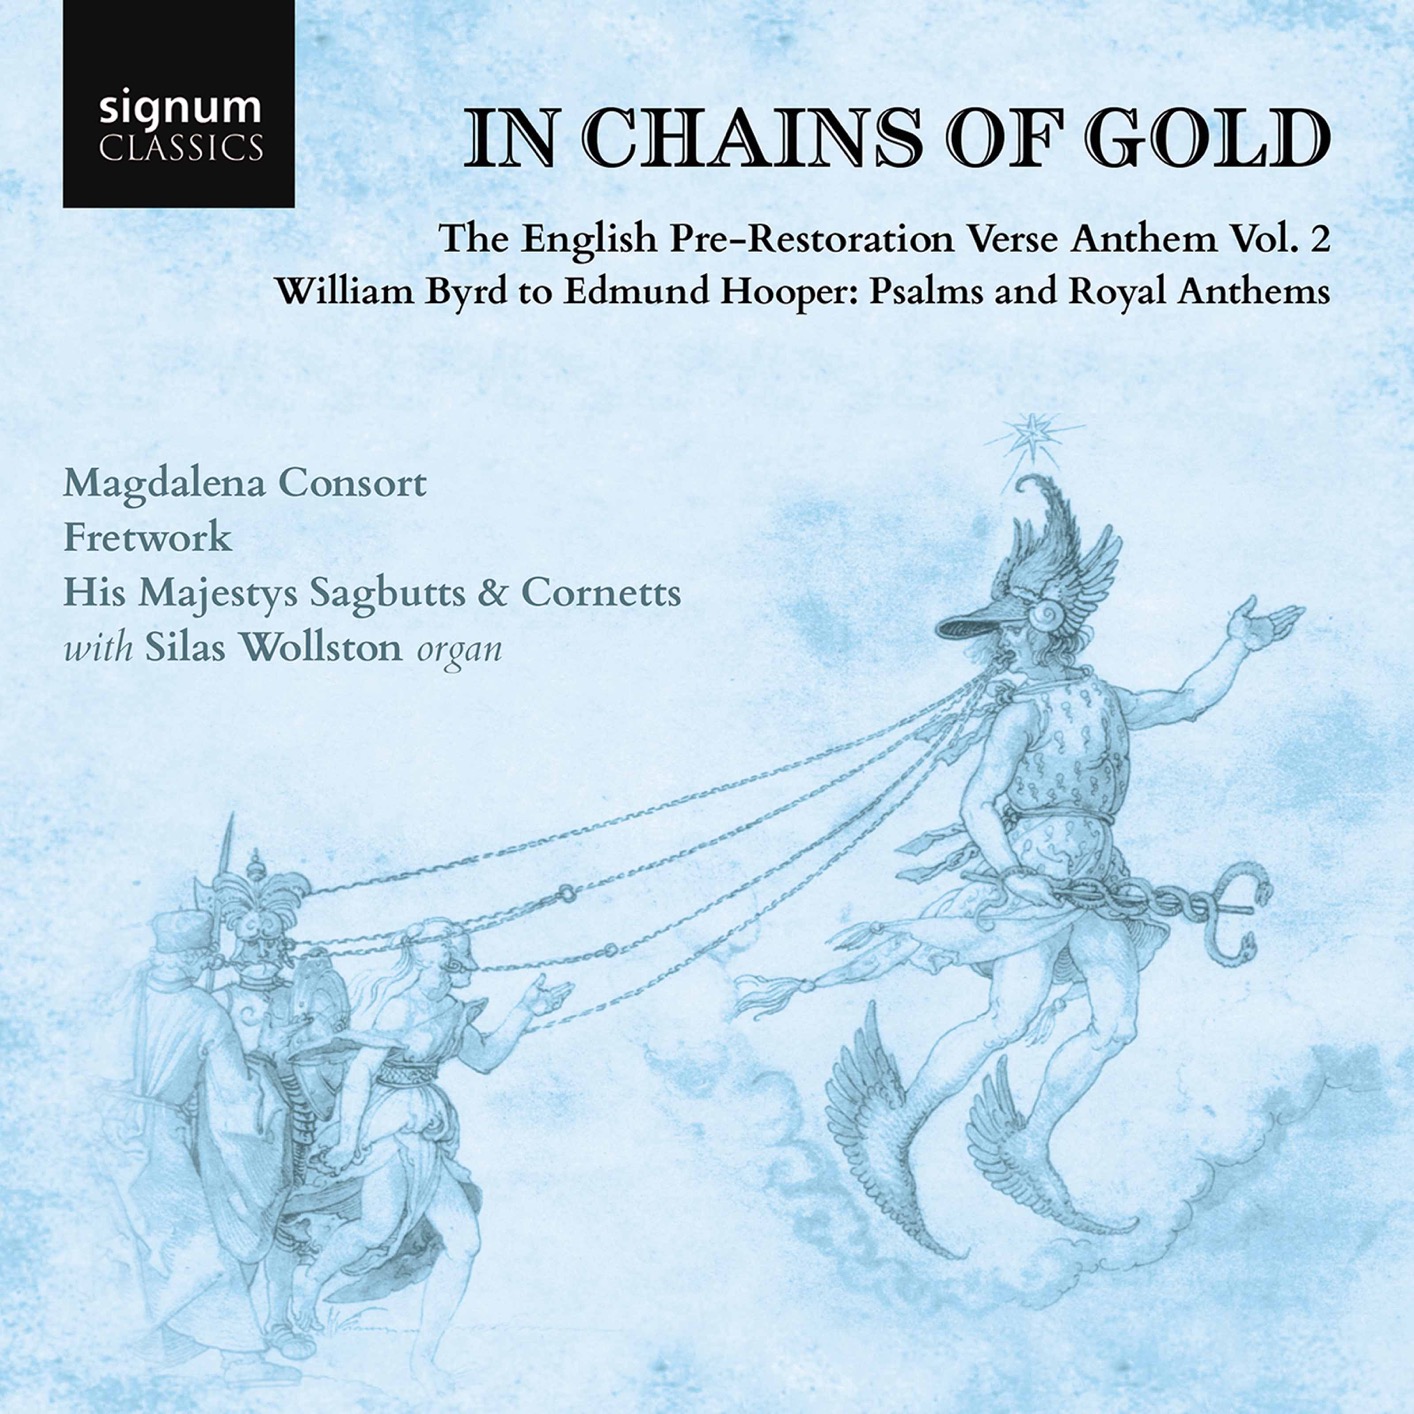 Magdalena Consort - In Chains of Gold,The English Pre-Restoration Verse Anthem Vol. 2 (2020) [FLAC 24bit/192kHz]